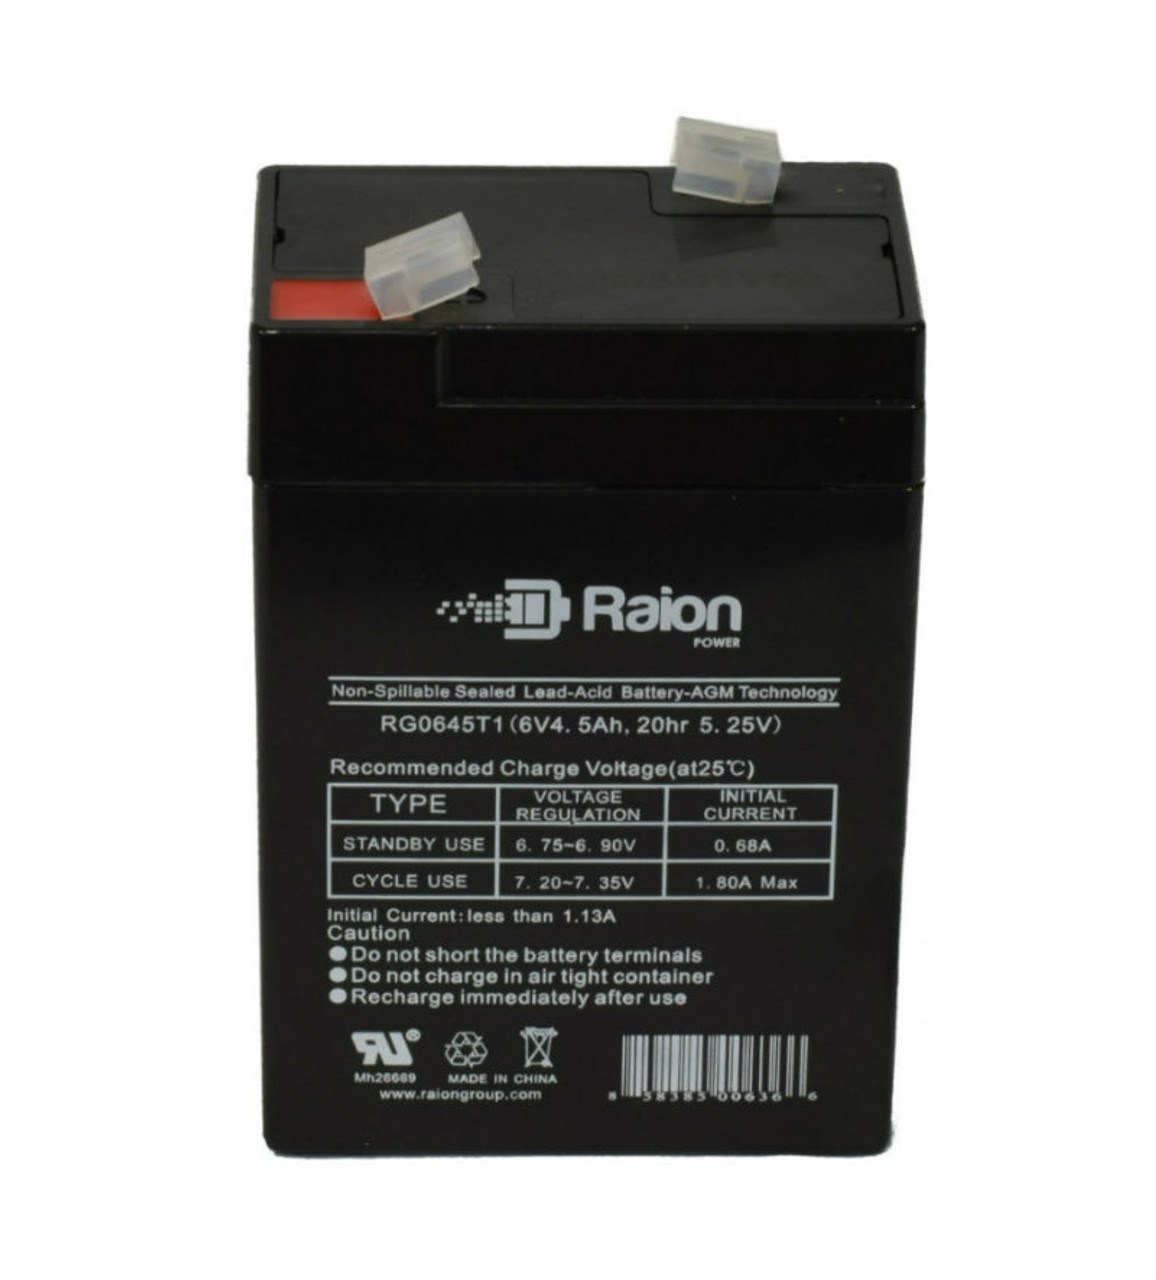 Raion Power RG0645T1 Replacement Battery Cartridge for Sigma 4000 Infusion Pump